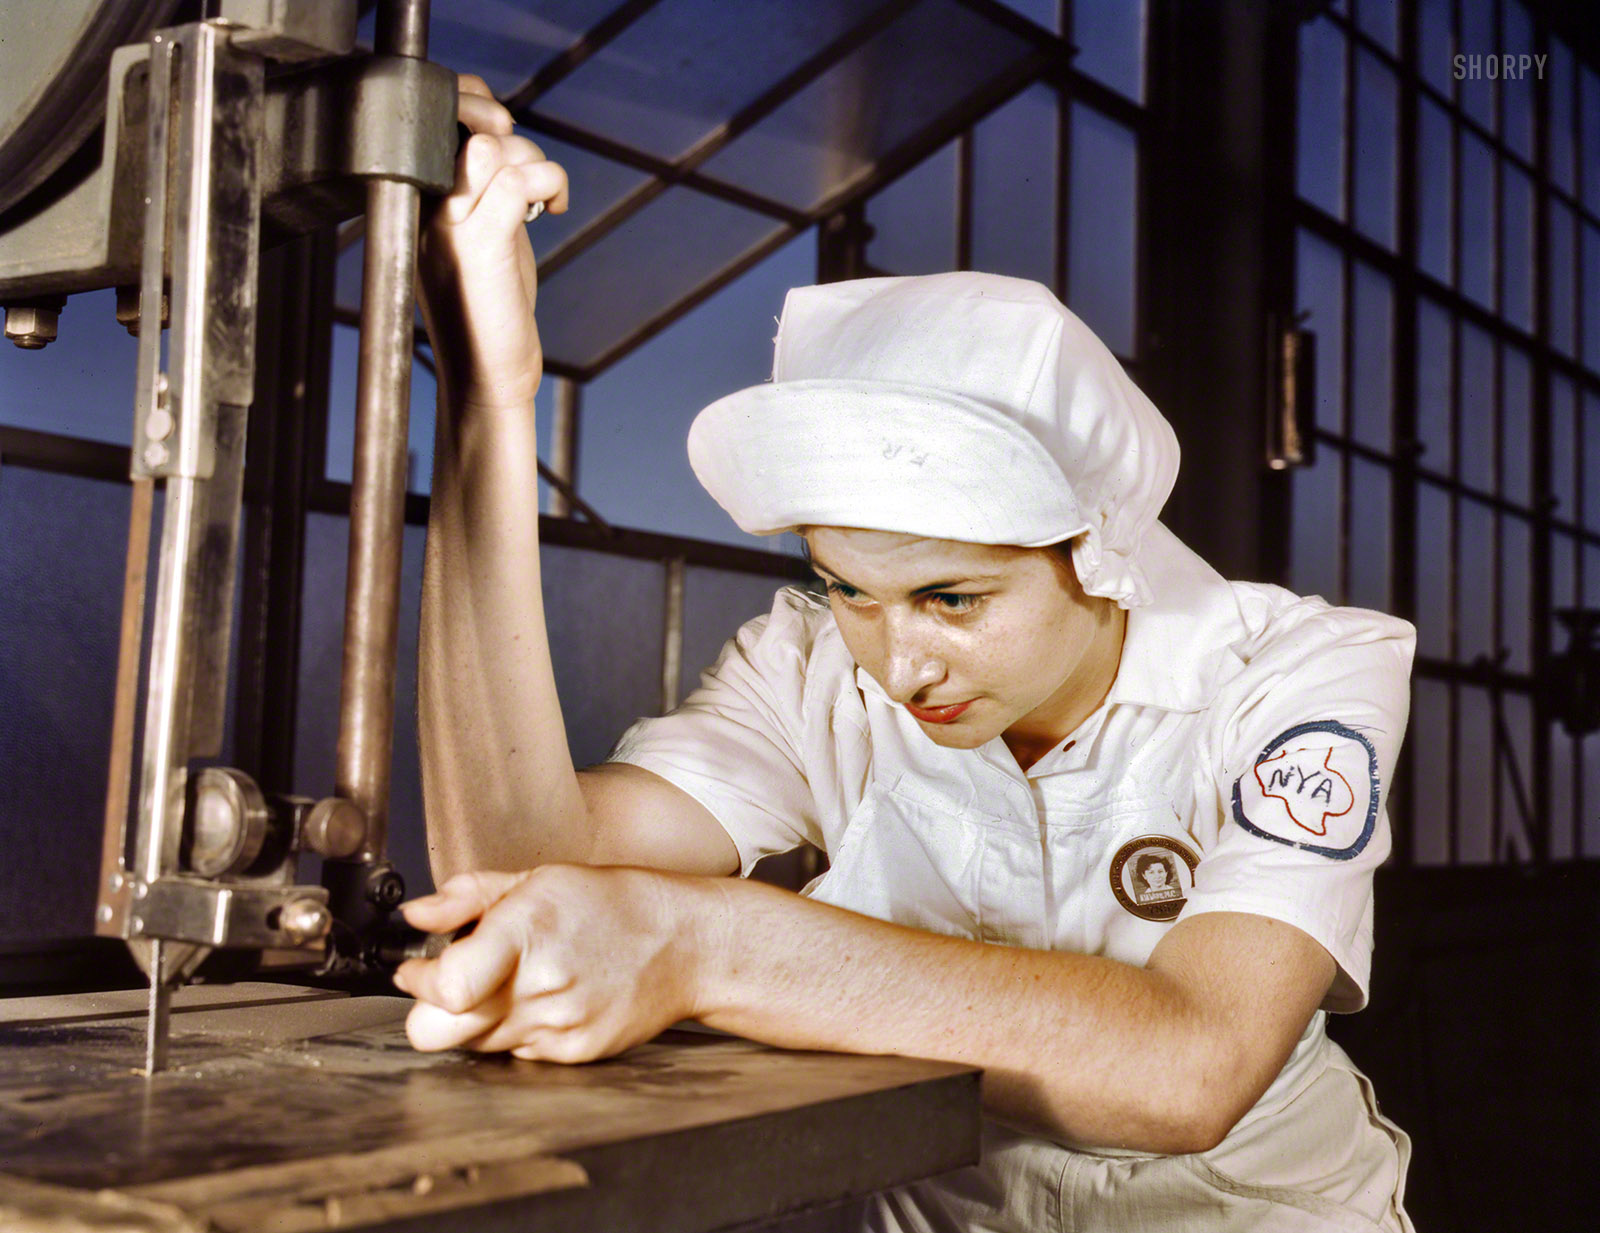 August 1942. "Women in white doctor Navy planes (motors) at the Naval Air Base, Corpus Christi, Texas. Mildred Webb, an National Youth Administration trainee at the base, is learning to operate a cutting machine in the Assembly and Repair Department. After about eight weeks as an apprentice she will be eligible for a civil service job in the capacity for which she has been trained." 4x5 Kodachrome transparency by Howard Hollem, Office of War Information. View full size.